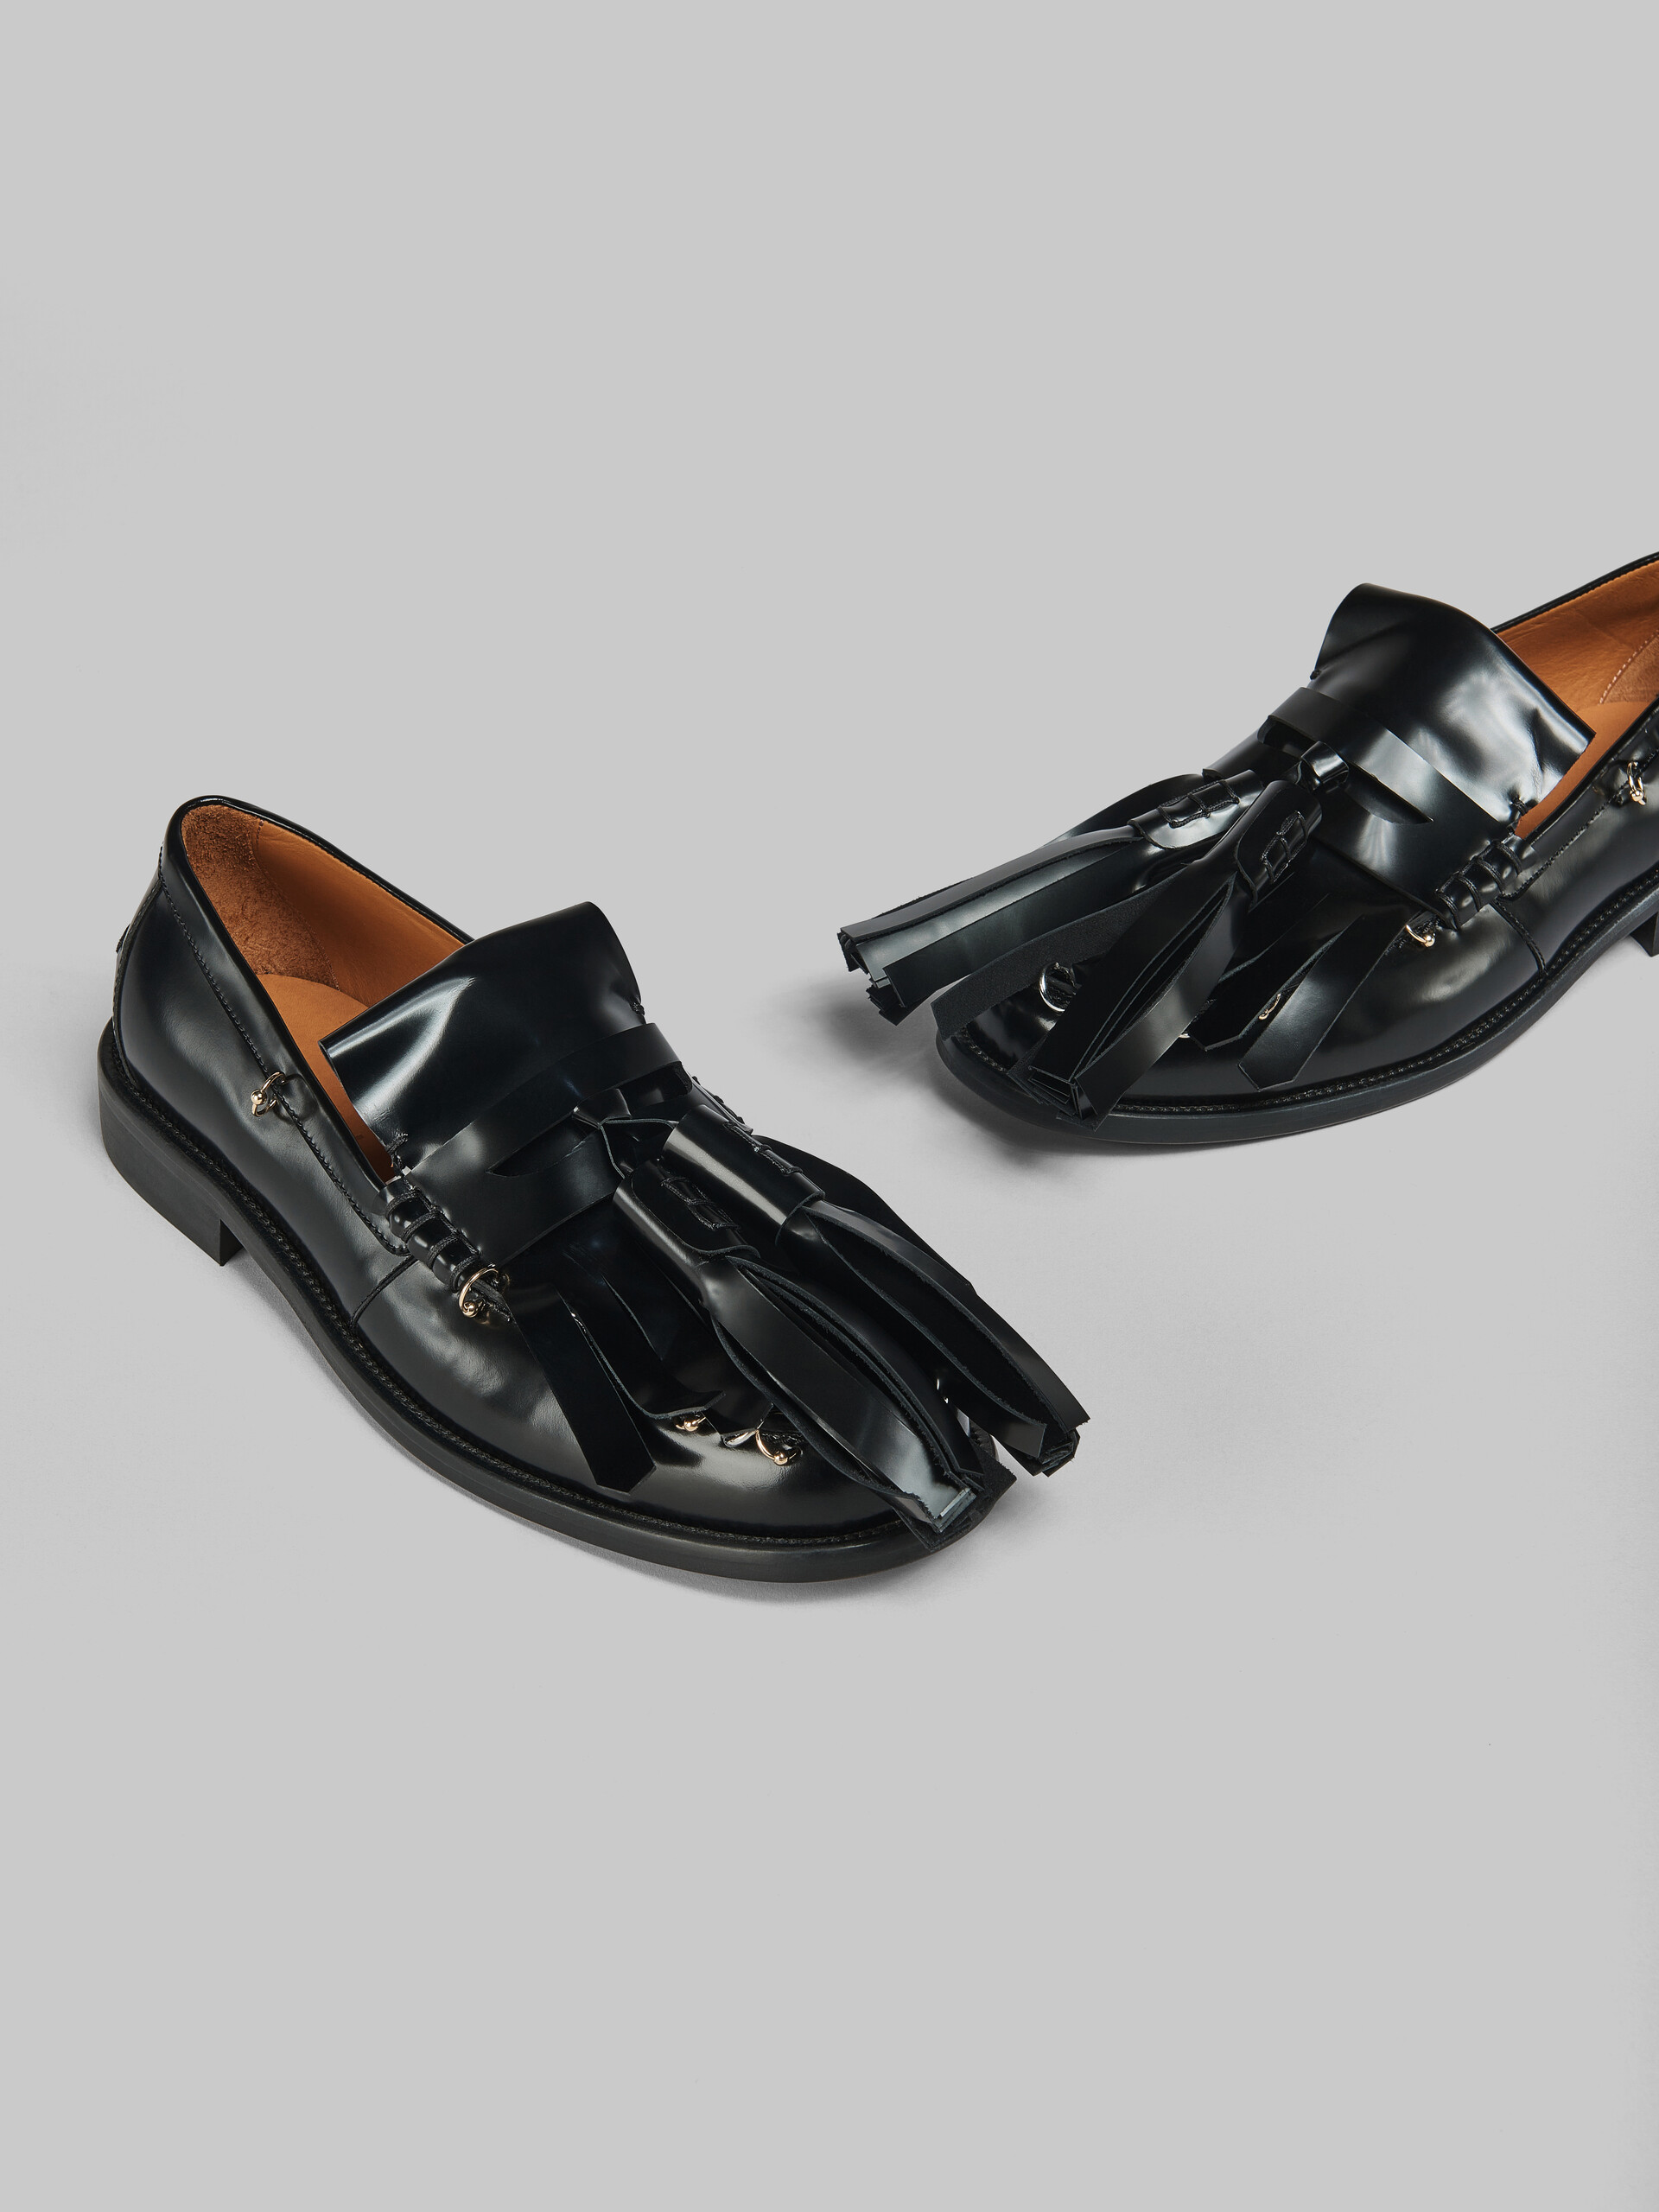 Black leather Bambi loafer with maxi tassels - Mocassin - Image 5